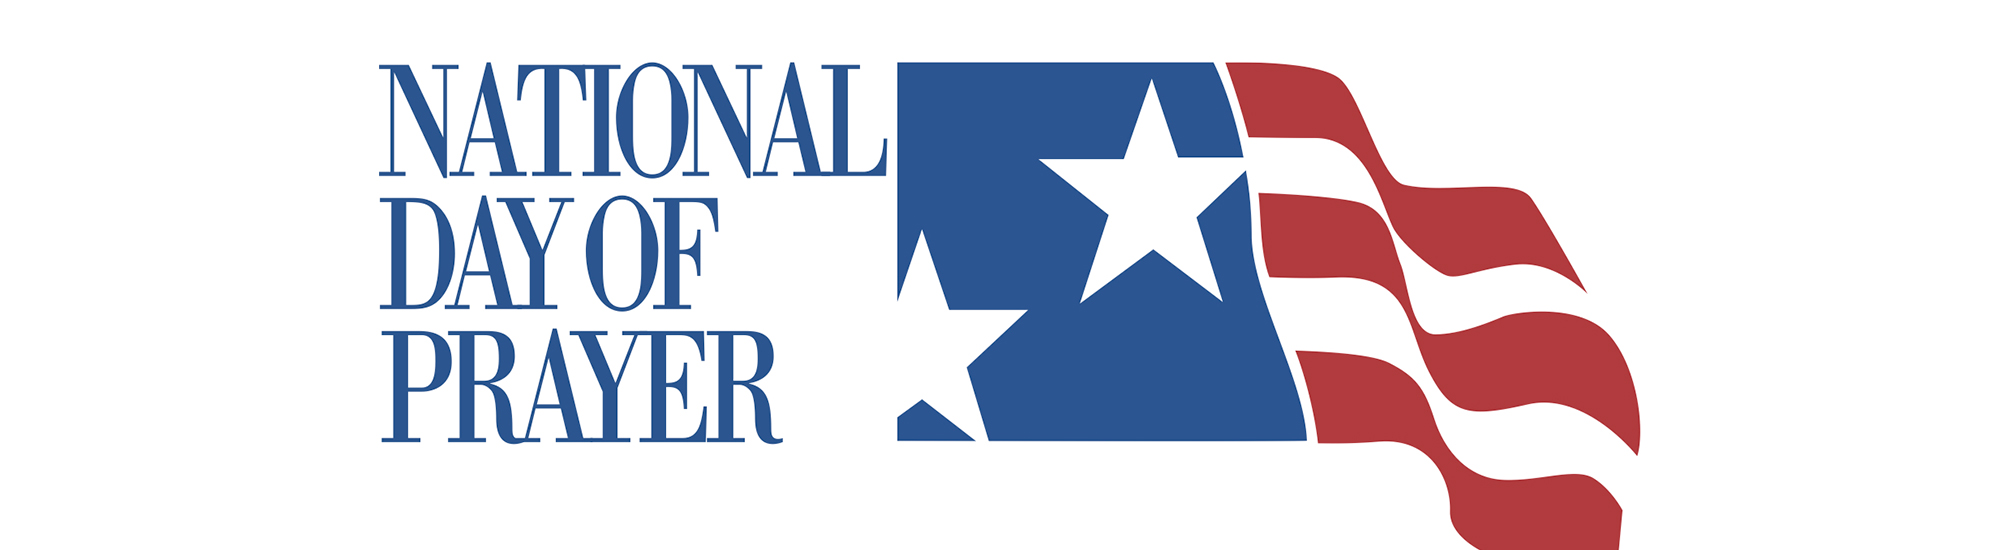 5 facts about the National Day of Prayer ERLC